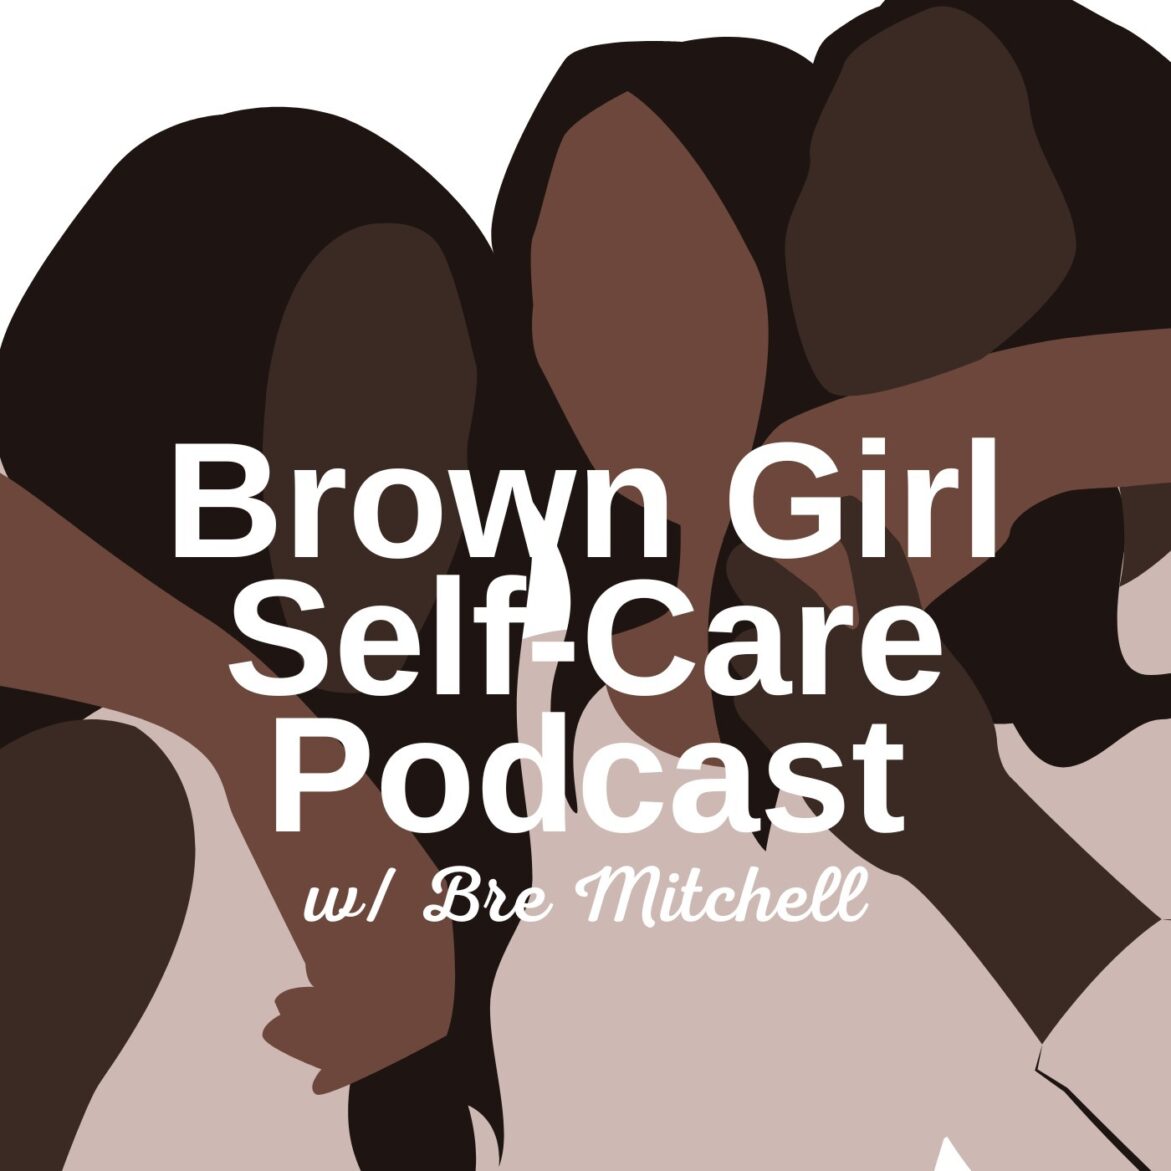 Black Podcasting - You Don't Have To Be The Scared Little Girl Anymore